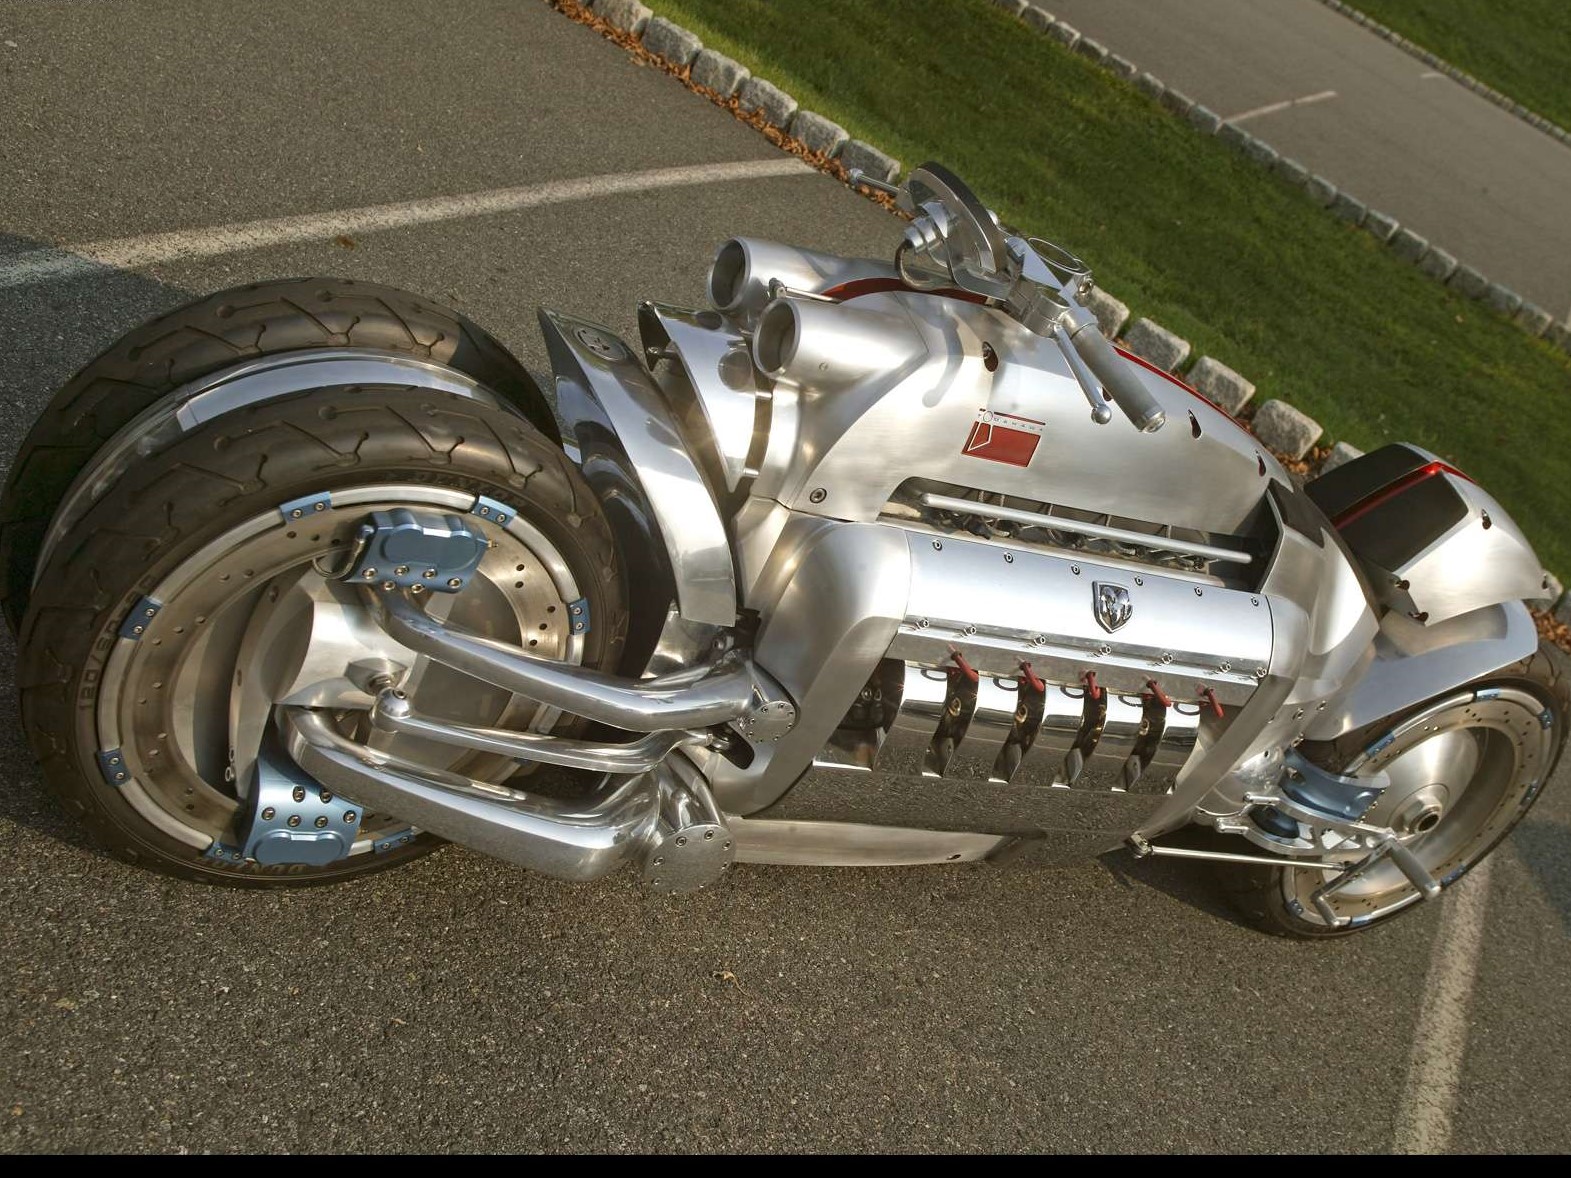 An aluminum bodied V10 powered motorcycle called the Dodge Tomahawk sits in a parking lot.